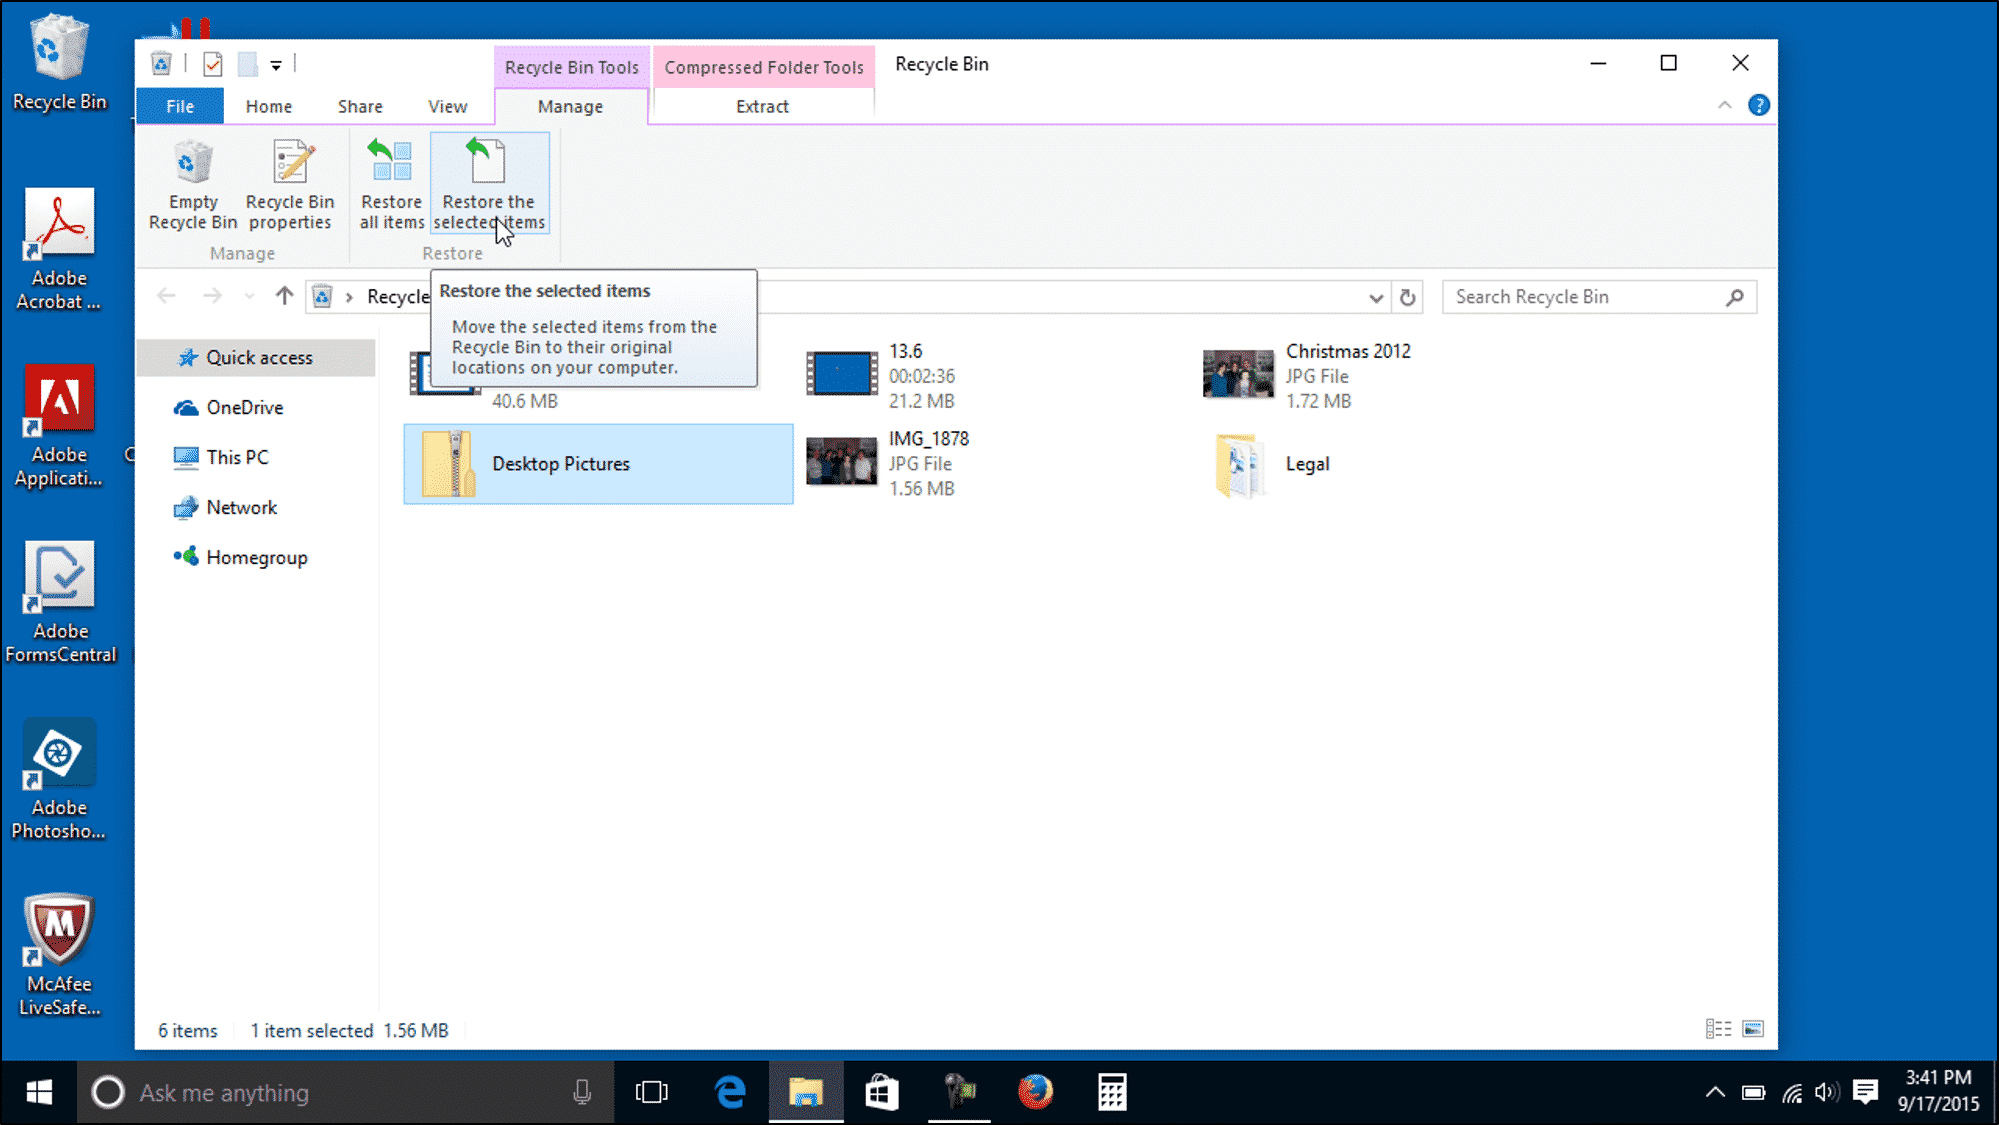 Restore A Deleted File From The Recycle Bin In Windows 10 - Instructions